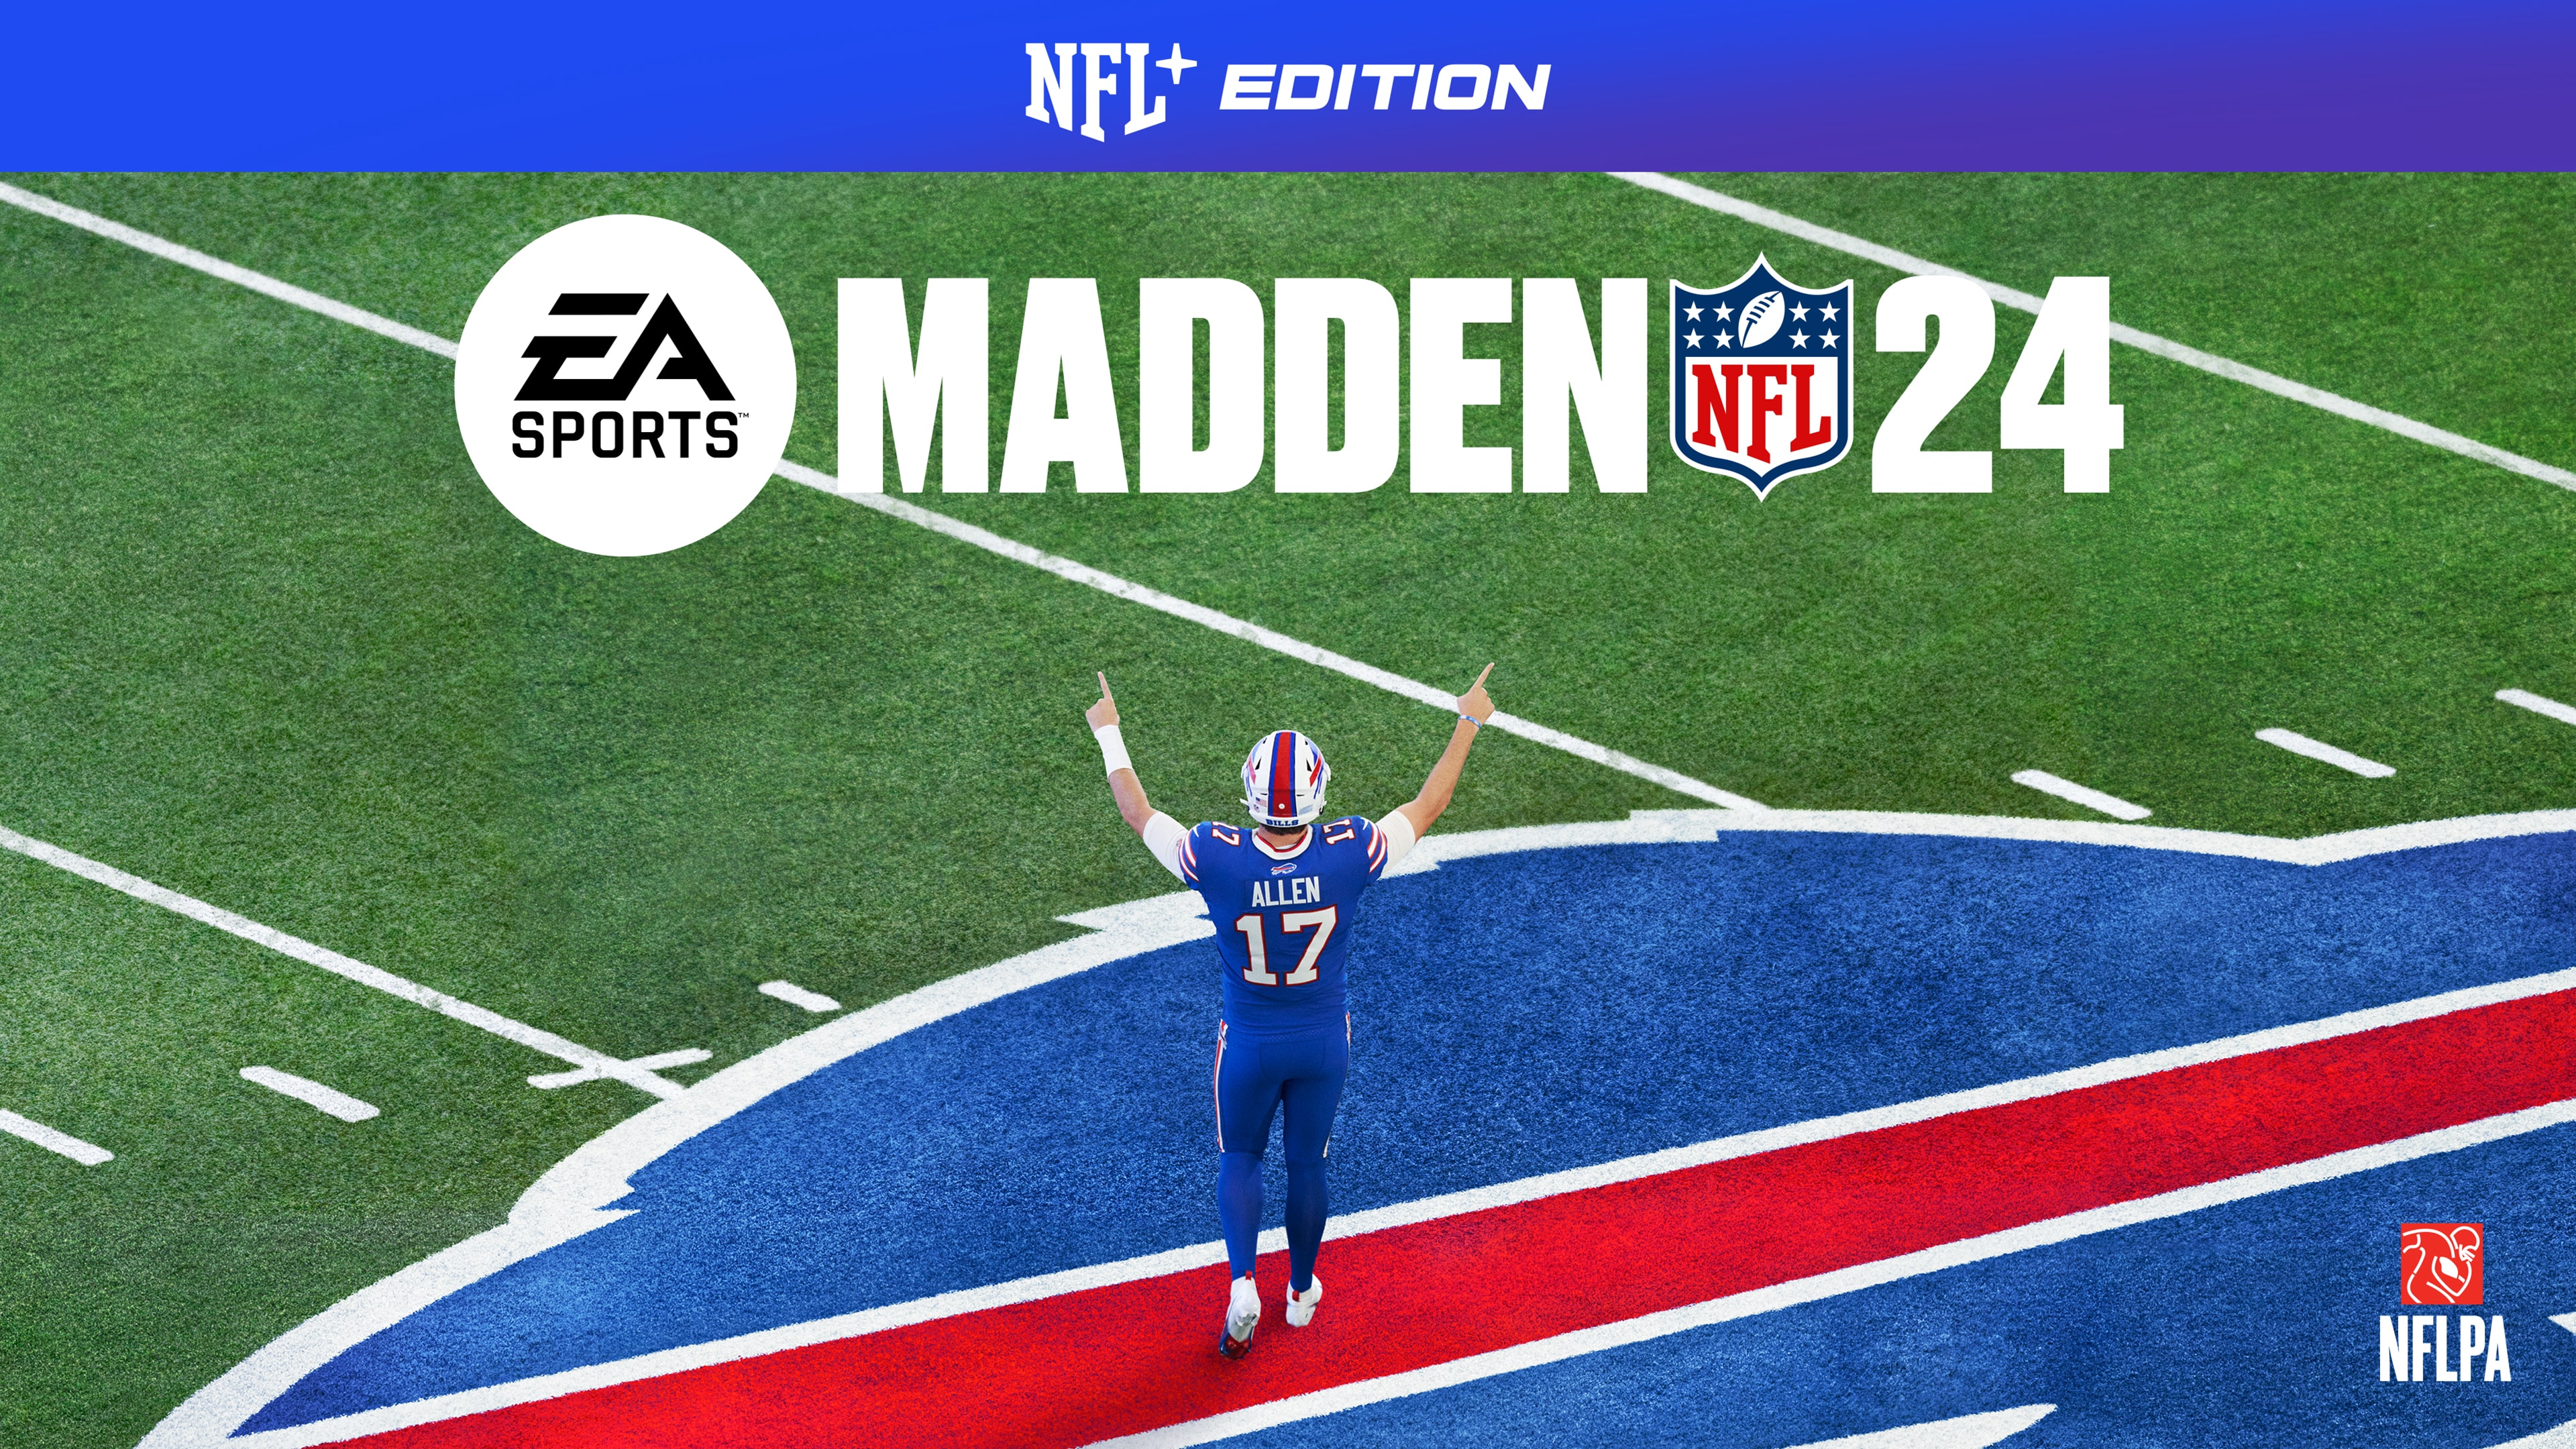 Madden NFL 24: NFL+ Edition PS5™ & PS4™